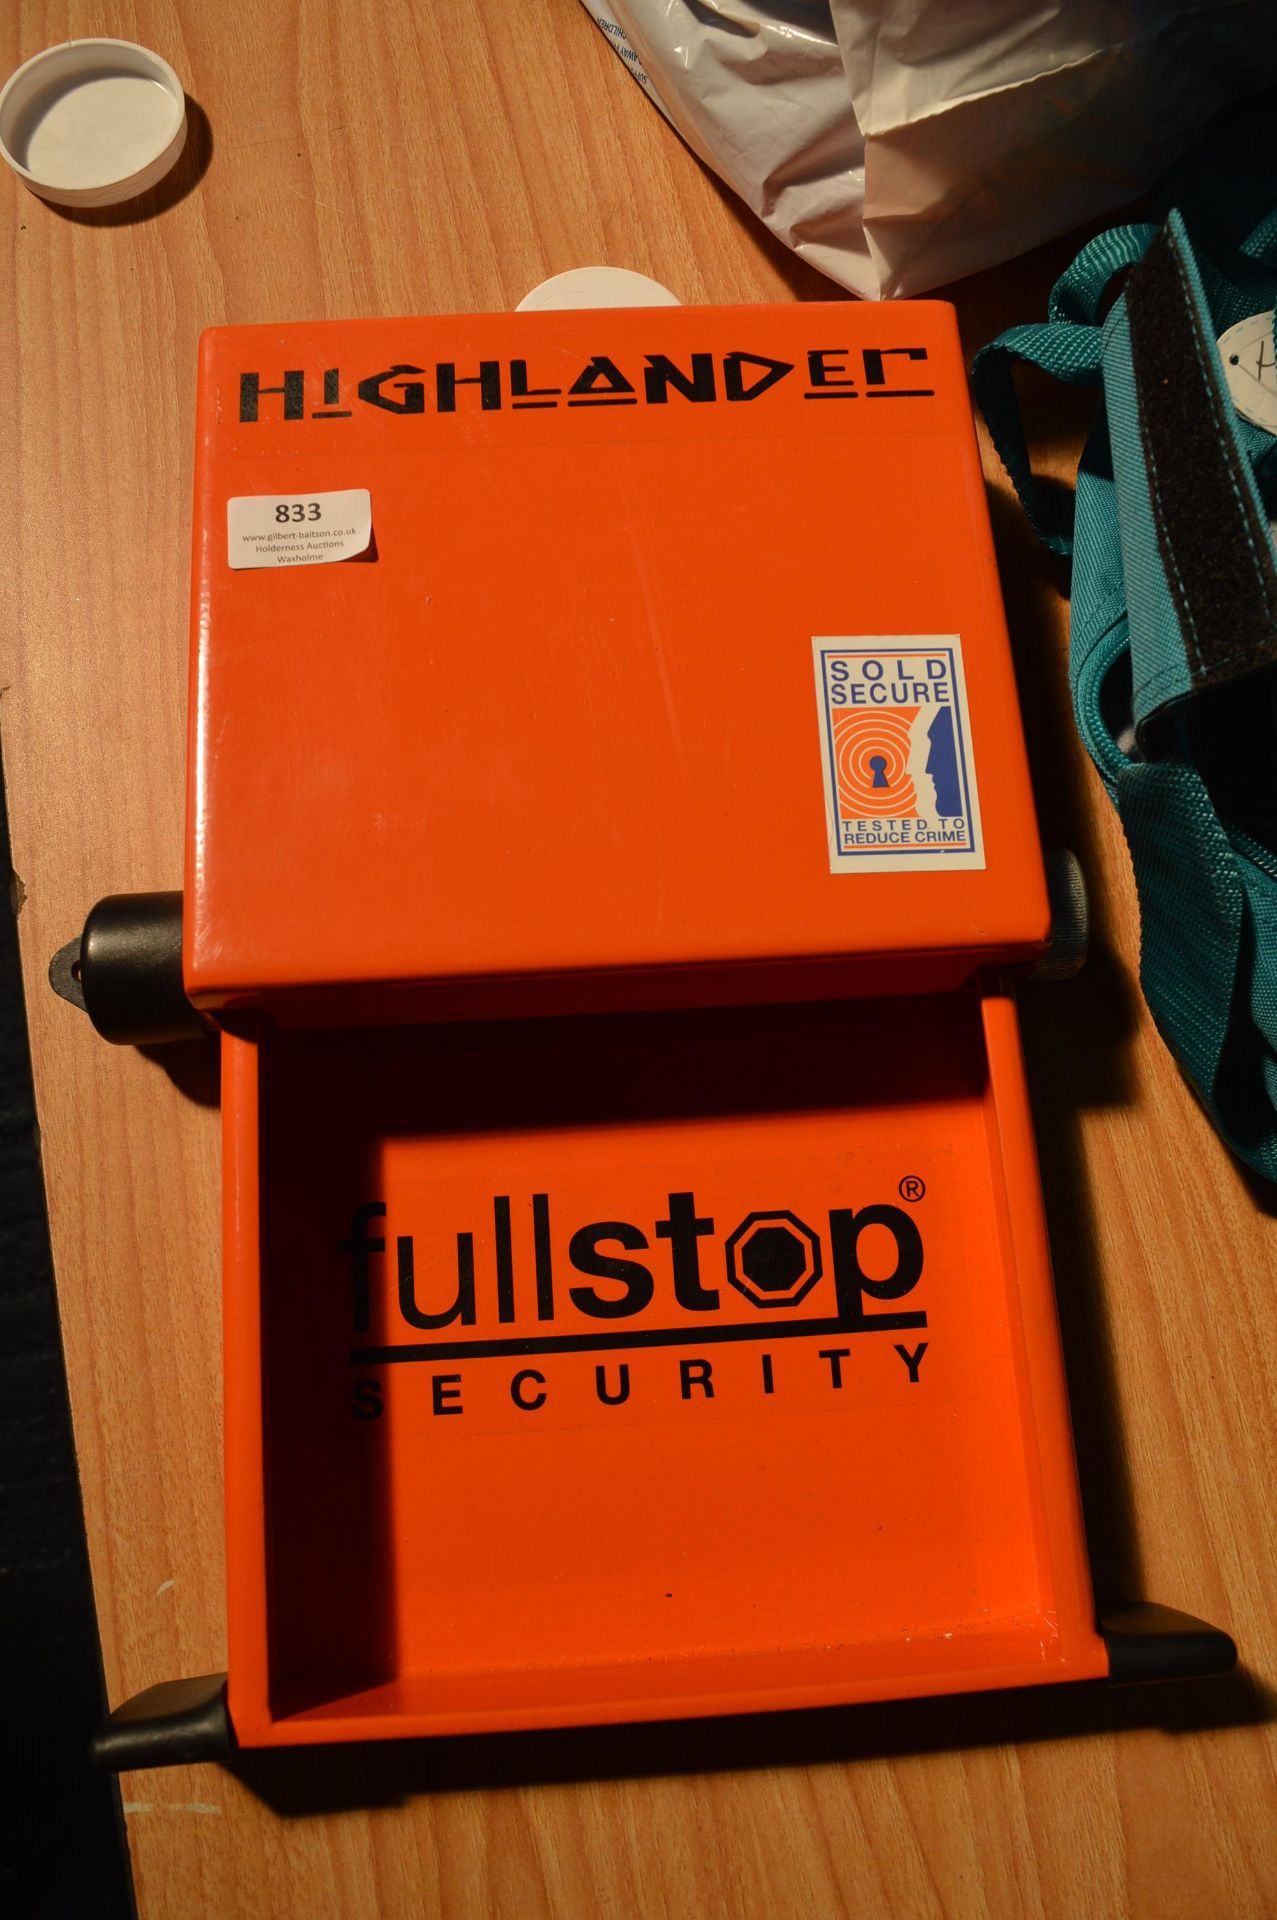 Highland Full Stop Security Clamp